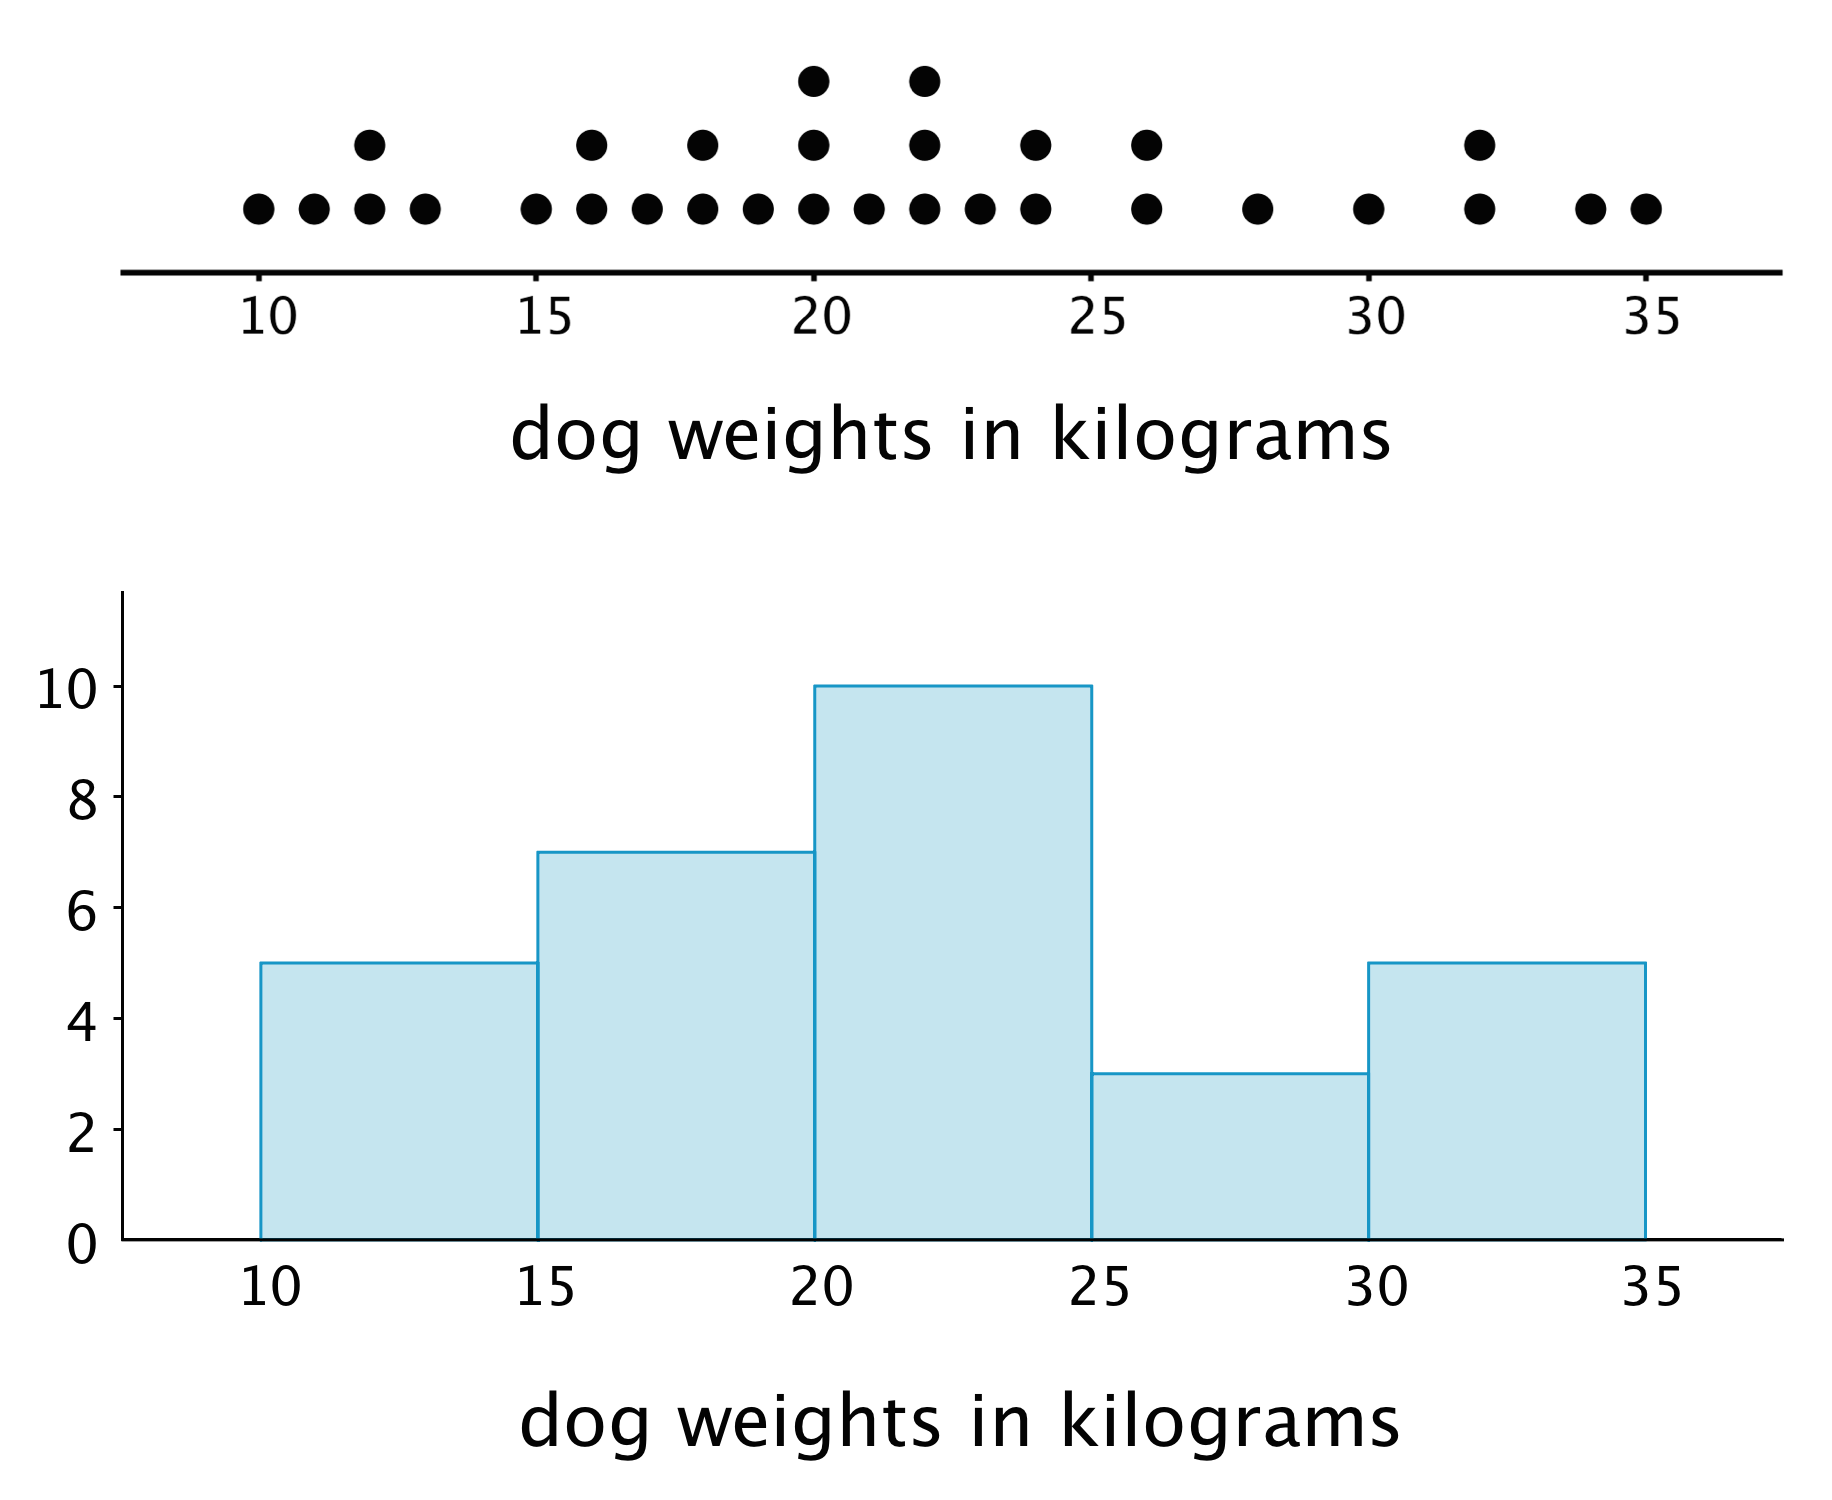 A dotplot and histogram for dog weights in kilograms. For the dot plot, the numbers 10 through 35, in increments of 5, are indicated. The 30 data values are as follows: 10 kilograms, 1 dot. 11 kilograms, 1 dot. 12 kilograms, 2 dots. 13 kilograms, 1 dot. 15 kilograms, 1 dot. 16 kilograms, 2 dots. 17 kilograms, 1 dot. 18 kilograms, 2 dots. 19 kilograms, 1 dot. 20 kilograms, 3 dots. 21 kilograms, 1 dot. 22 kilograms, 3 dots. 23 kilograms, 1 dot. 24 kilograms, 2 dots. 26 kilograms, 2 dots. 28 kilograms, 1 dot. 30 kilograms, 1 dot. 32 kilograms, 2 dots. 34 kilograms, 1 dot. 35 kilograms, 1 dot.  For the histogram, the horizontal axis is labeled “dog weights in kilograms” and the numbers 10 through 35, in increments of 5, are indicated. On the vertical axis the numbers 0 through 10, in increments of 2, are indicated. The data represented by the bars are as follows: Weight from 10 up to 15, 5. Weight from 15 up to 20, 7. Weight from 20 up to 25, 10. Weight from 25 up to 30, 3. Weight from 30 up to 35, 5.